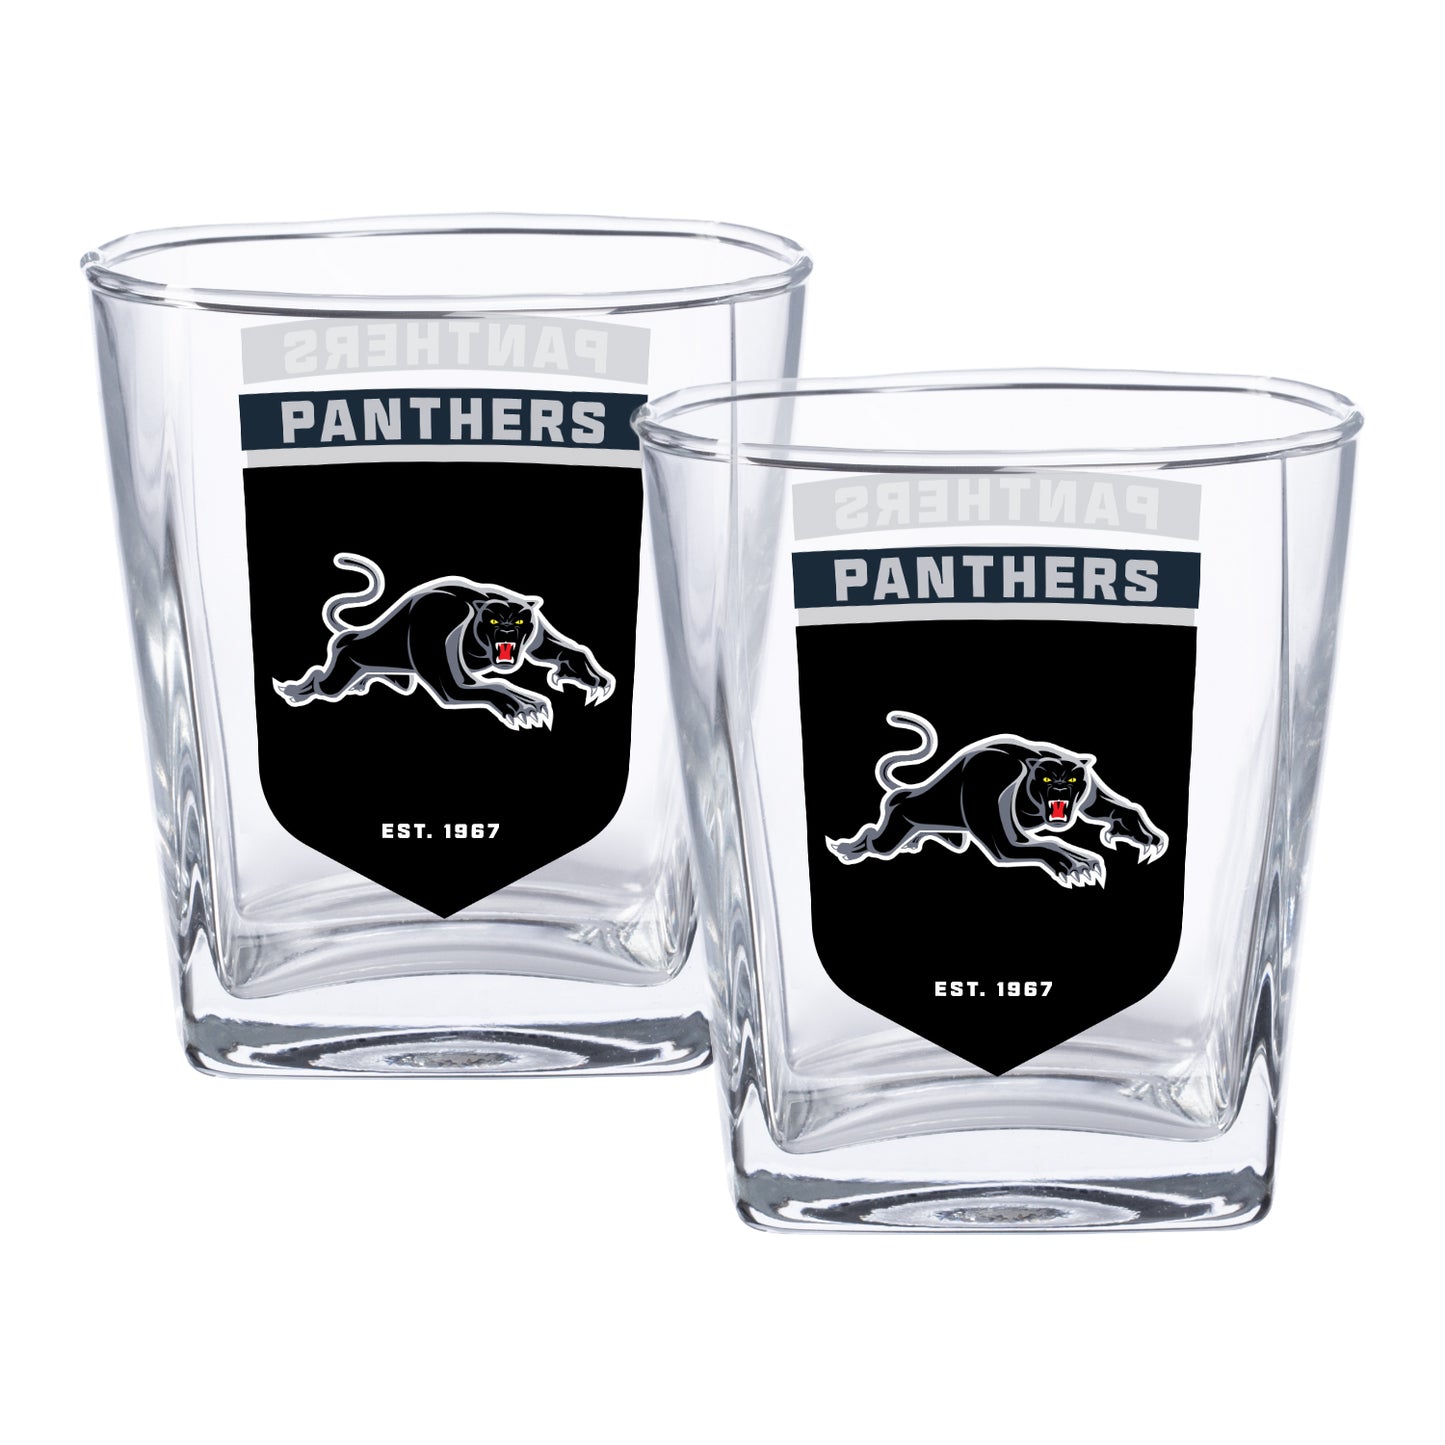 Penrith Panthers 2 Pack Spirit Glasses